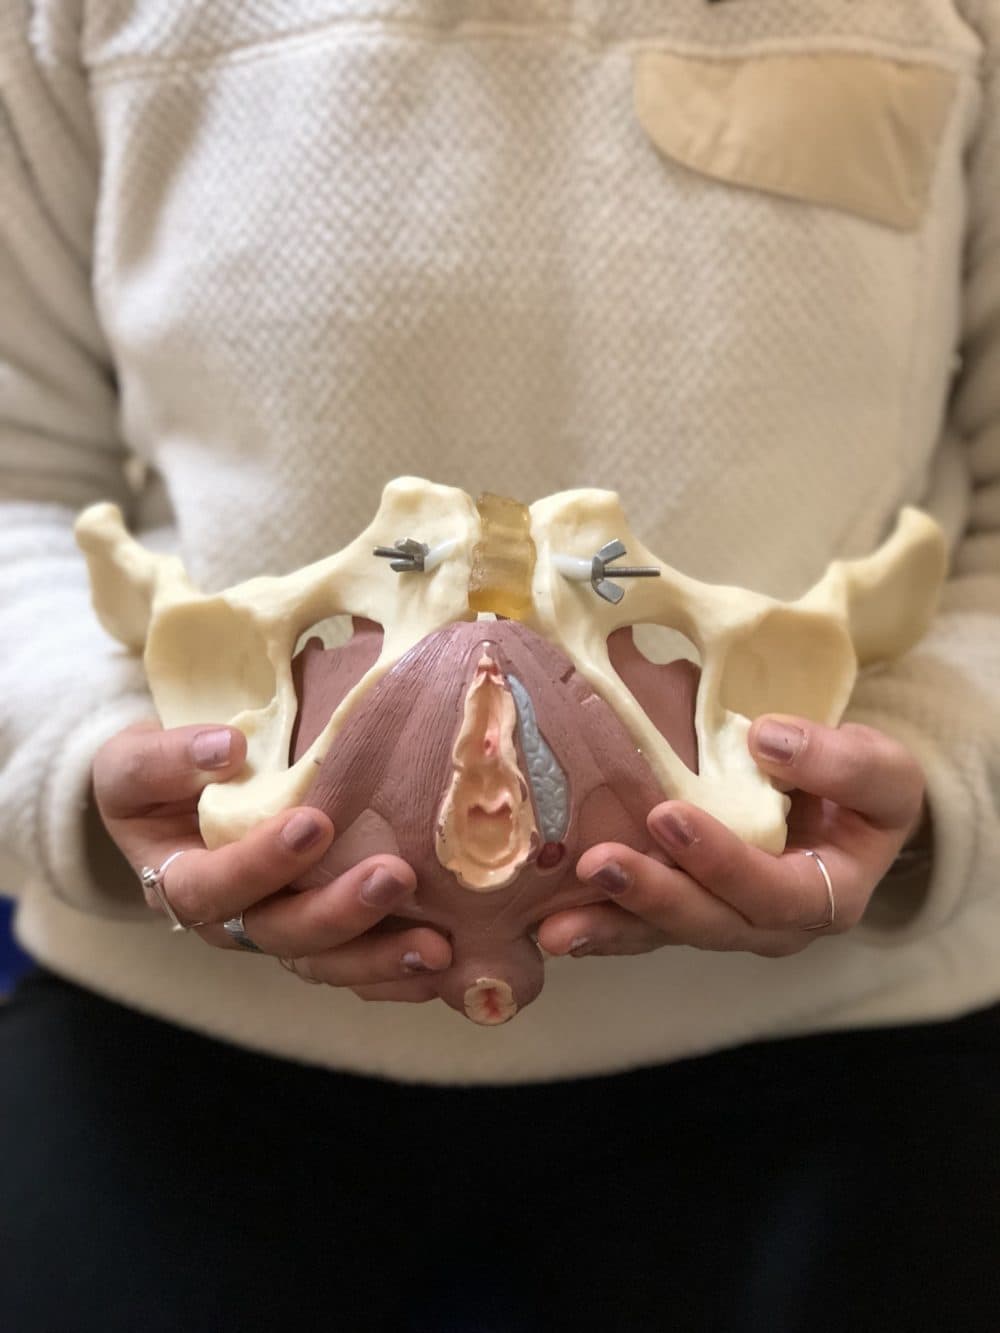 Donna Chiao, DPT, an orthopedic and pelvic health physical therapist, holds a model pelvis. (Courtesy of the author)